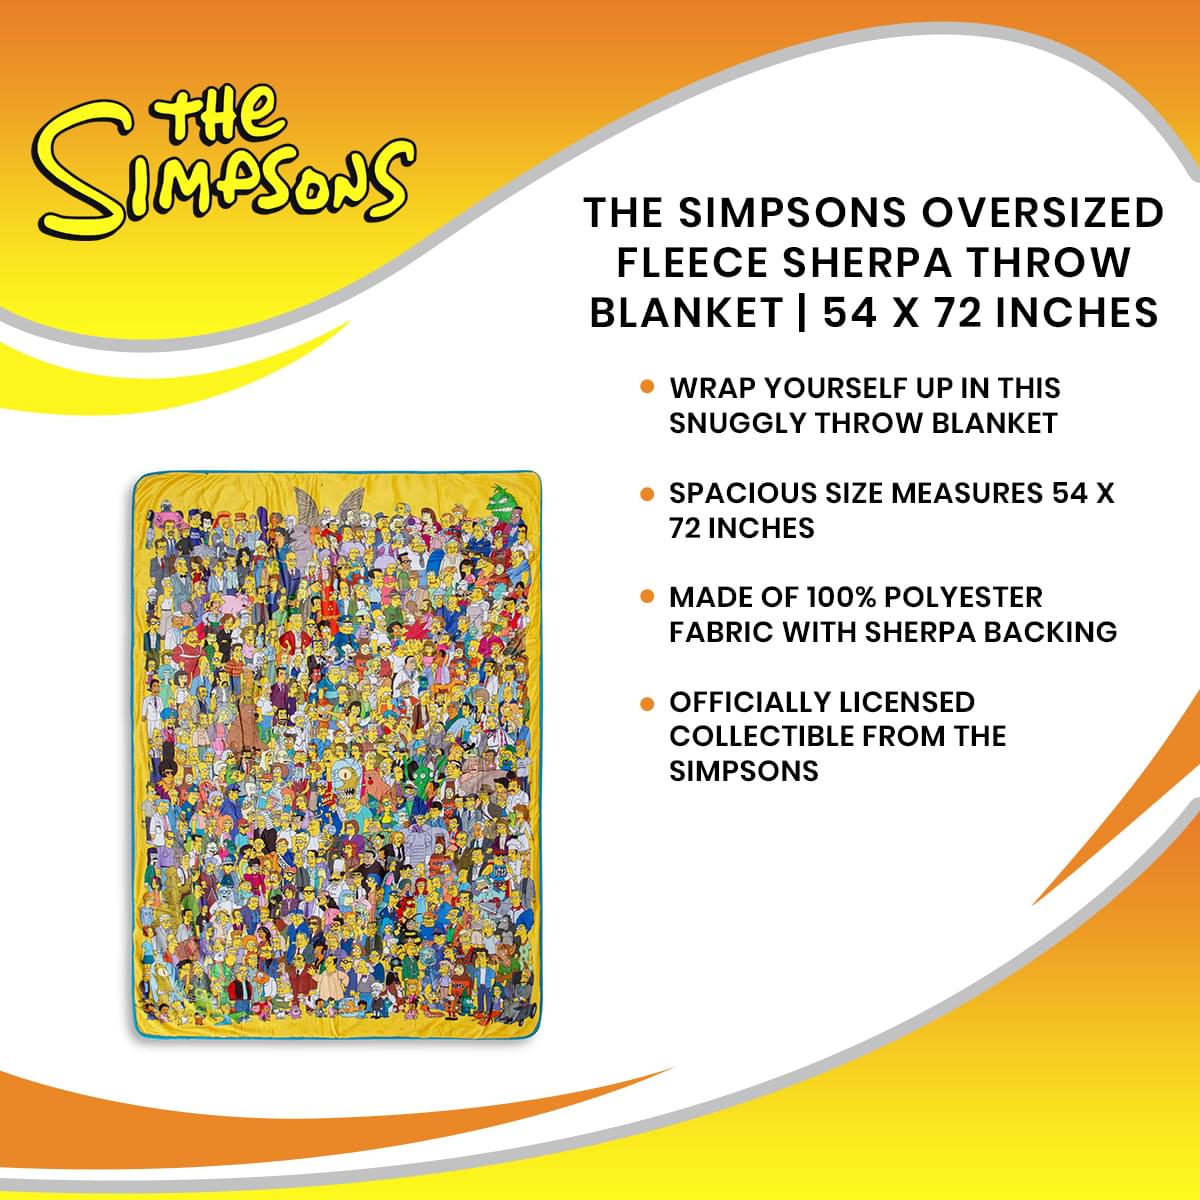 The Simpsons Oversized Fleece Sherpa Throw Blanket | 49 x 72 Inches